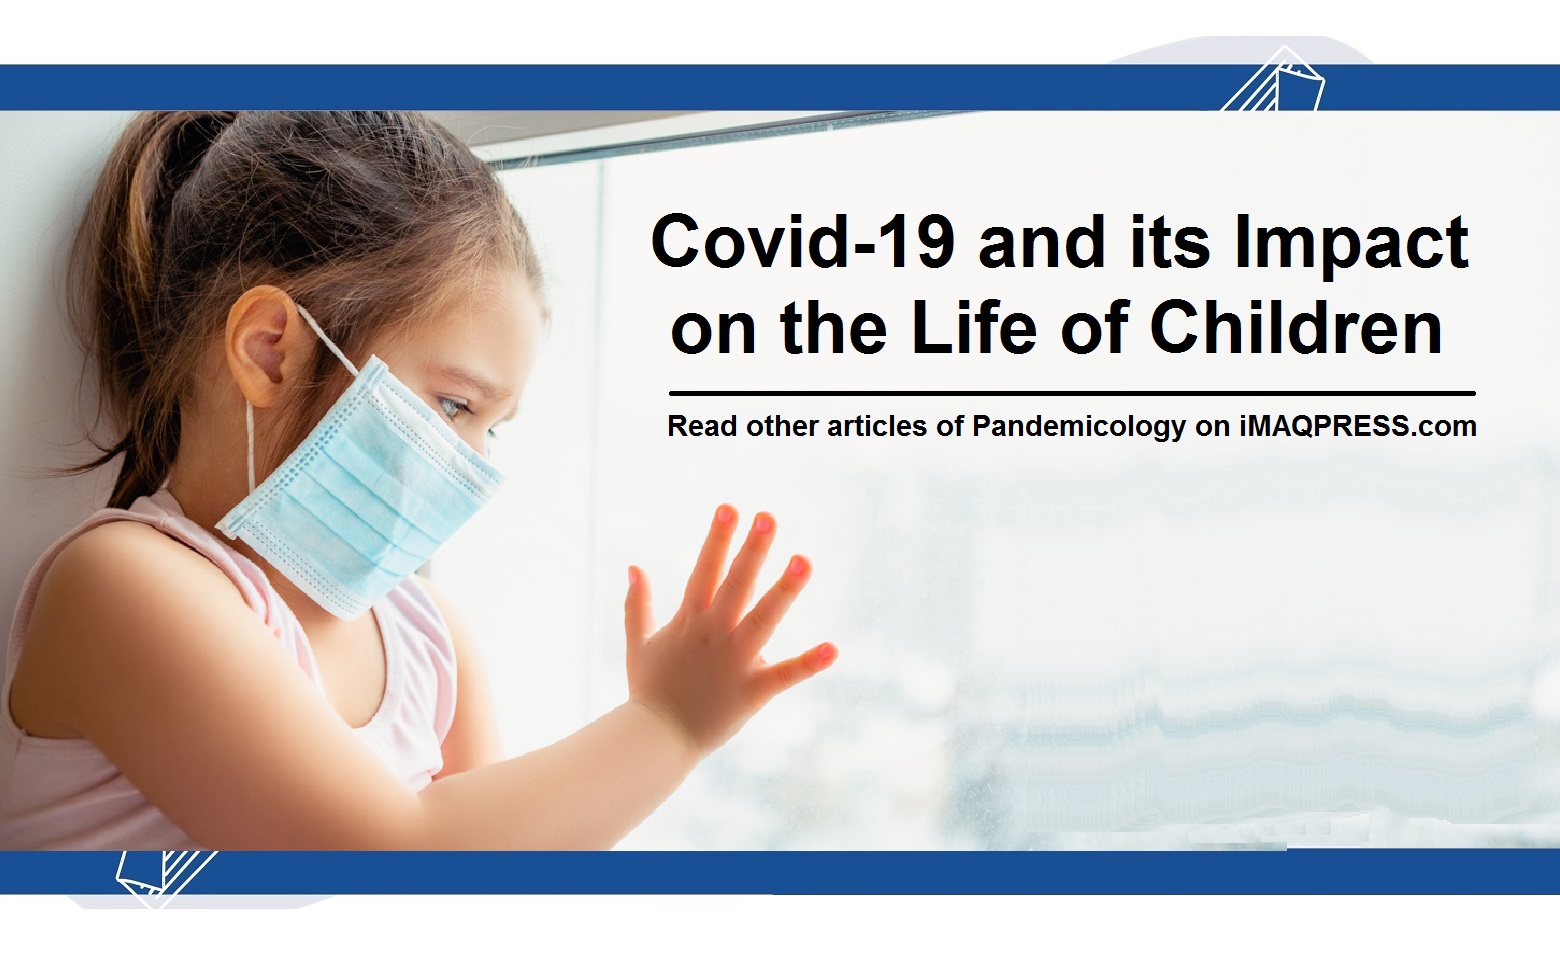 Covid-19 and its Impact